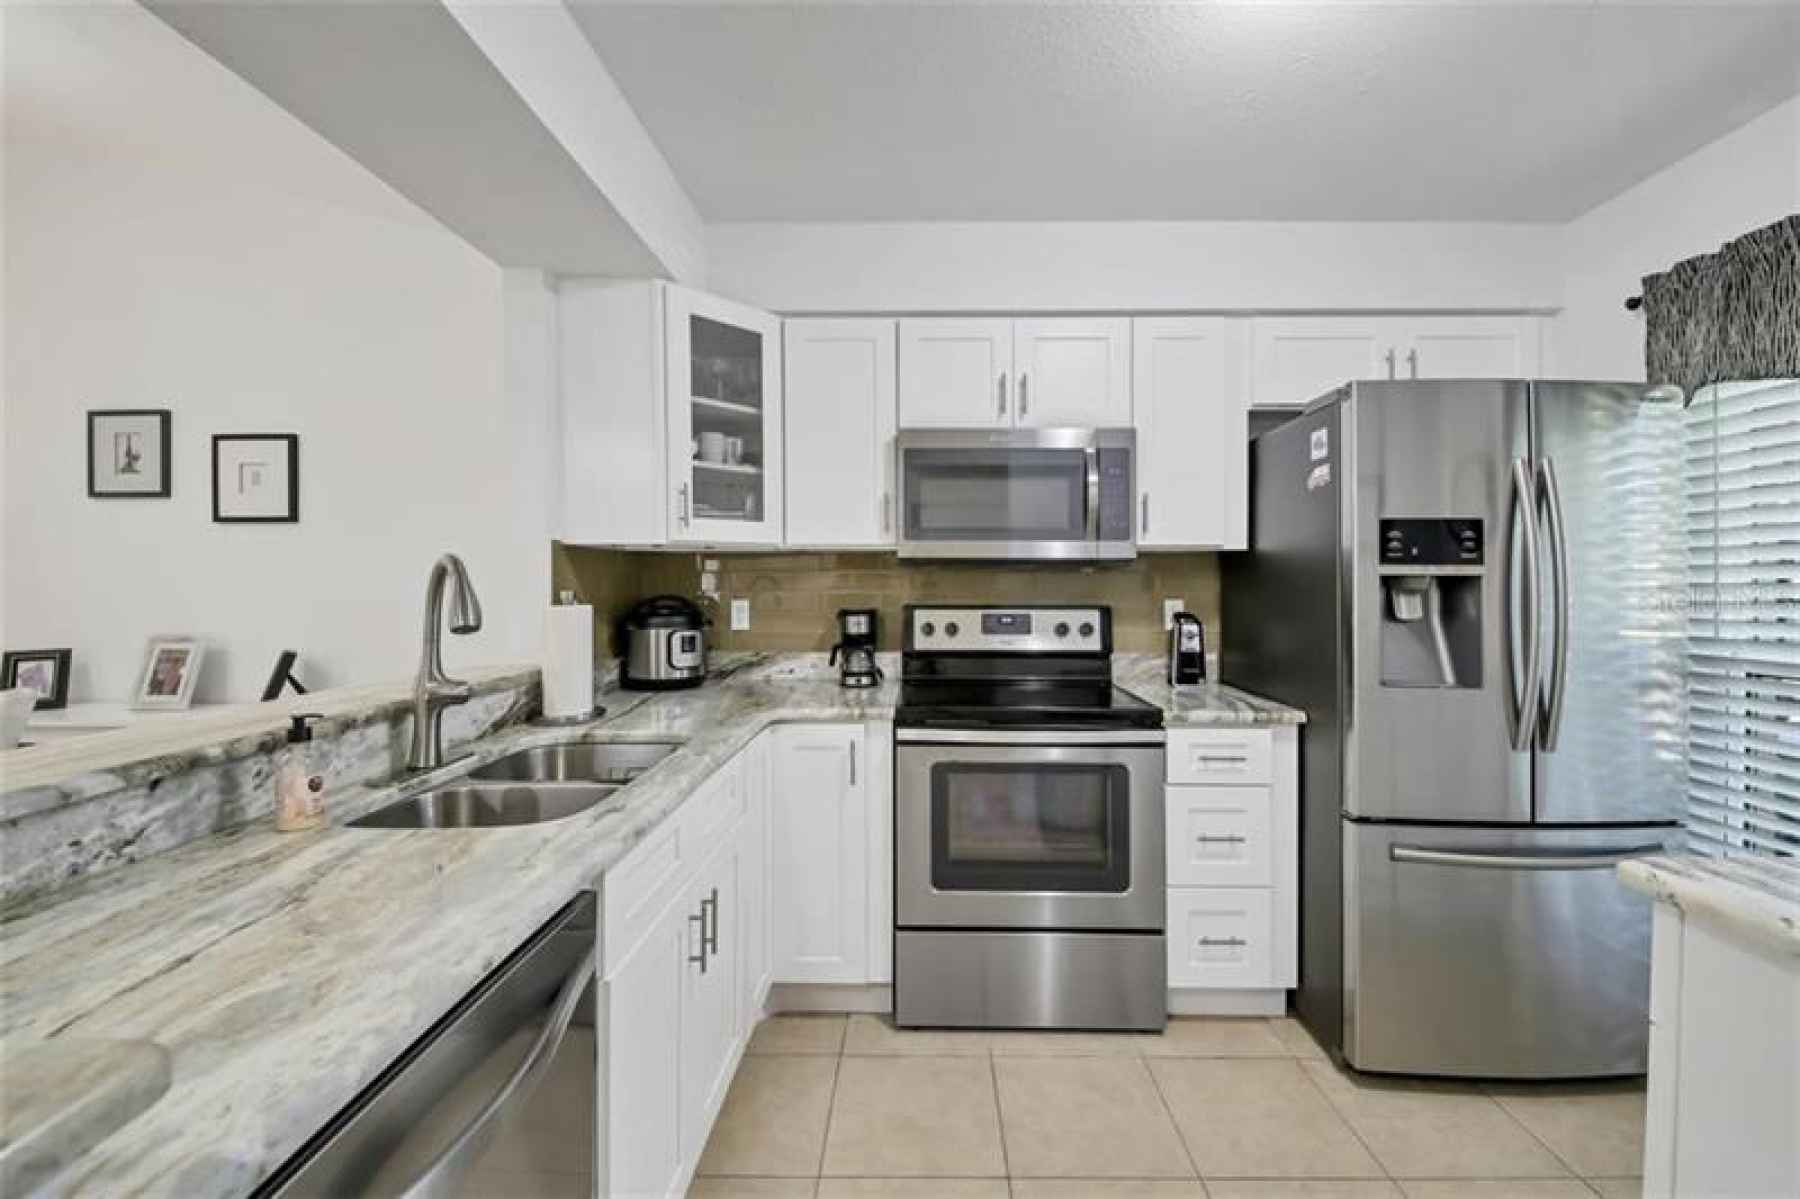 Gorgeous granite countertops, new white cabinetry, stainless appliances, new windows, new disposal